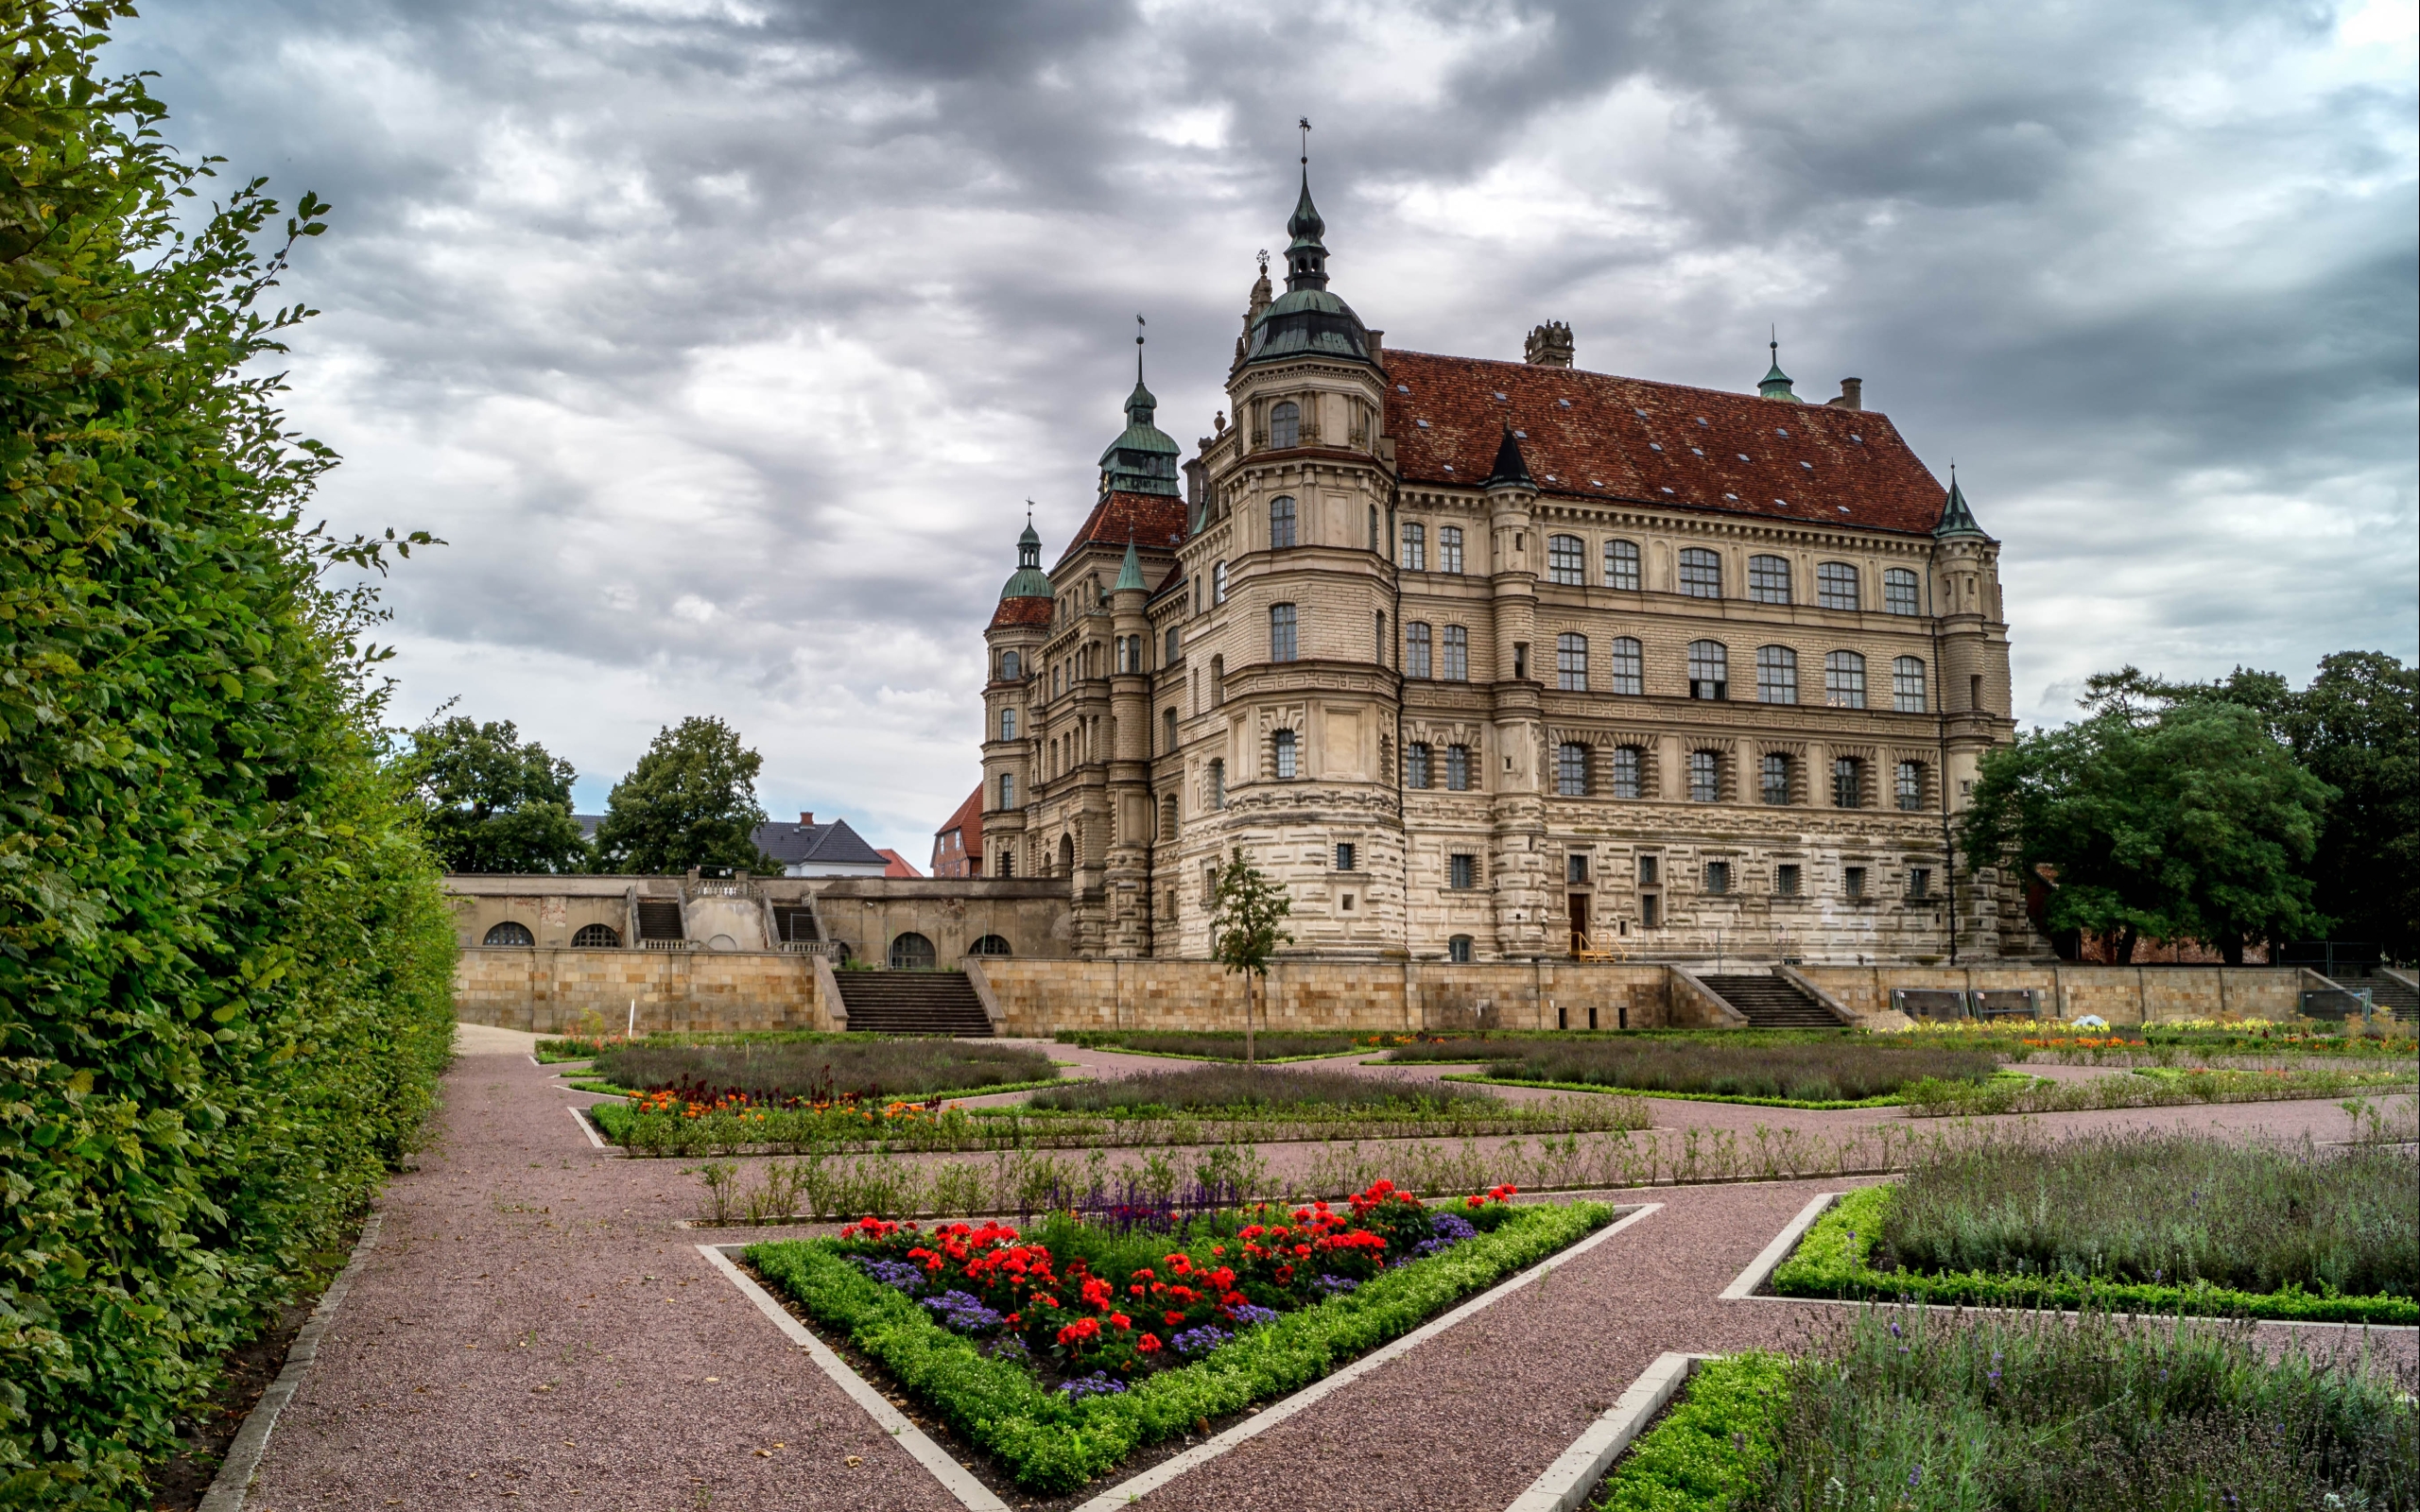 High Resolution Wallpaper | Güstrow Palace 2560x1600 px